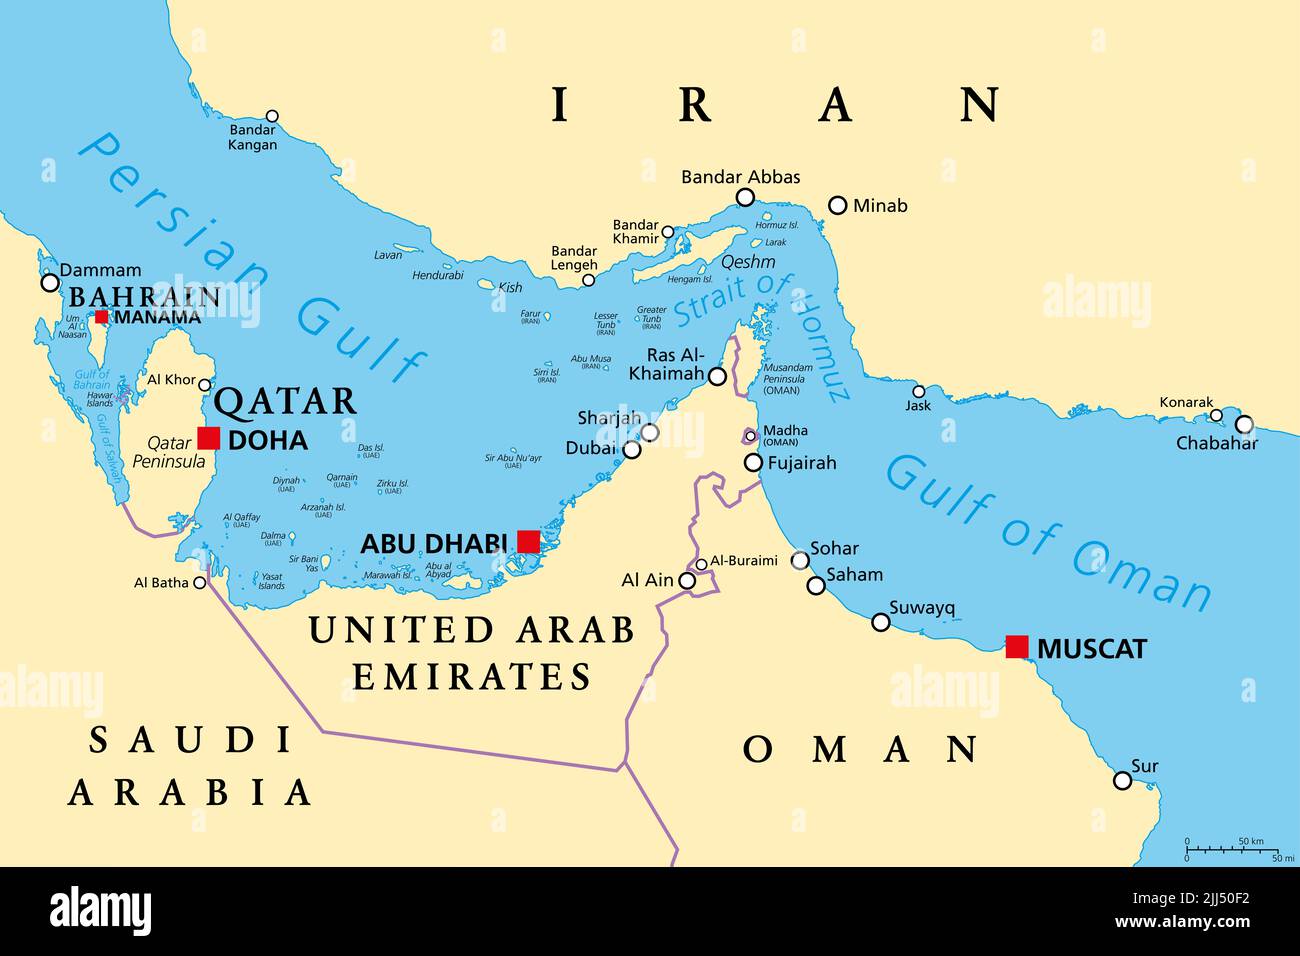 Strait of Hormuz, political map. Waterway between Persian Gulf and Gulf of Oman, a strategically extremely important choke point. Stock Photo